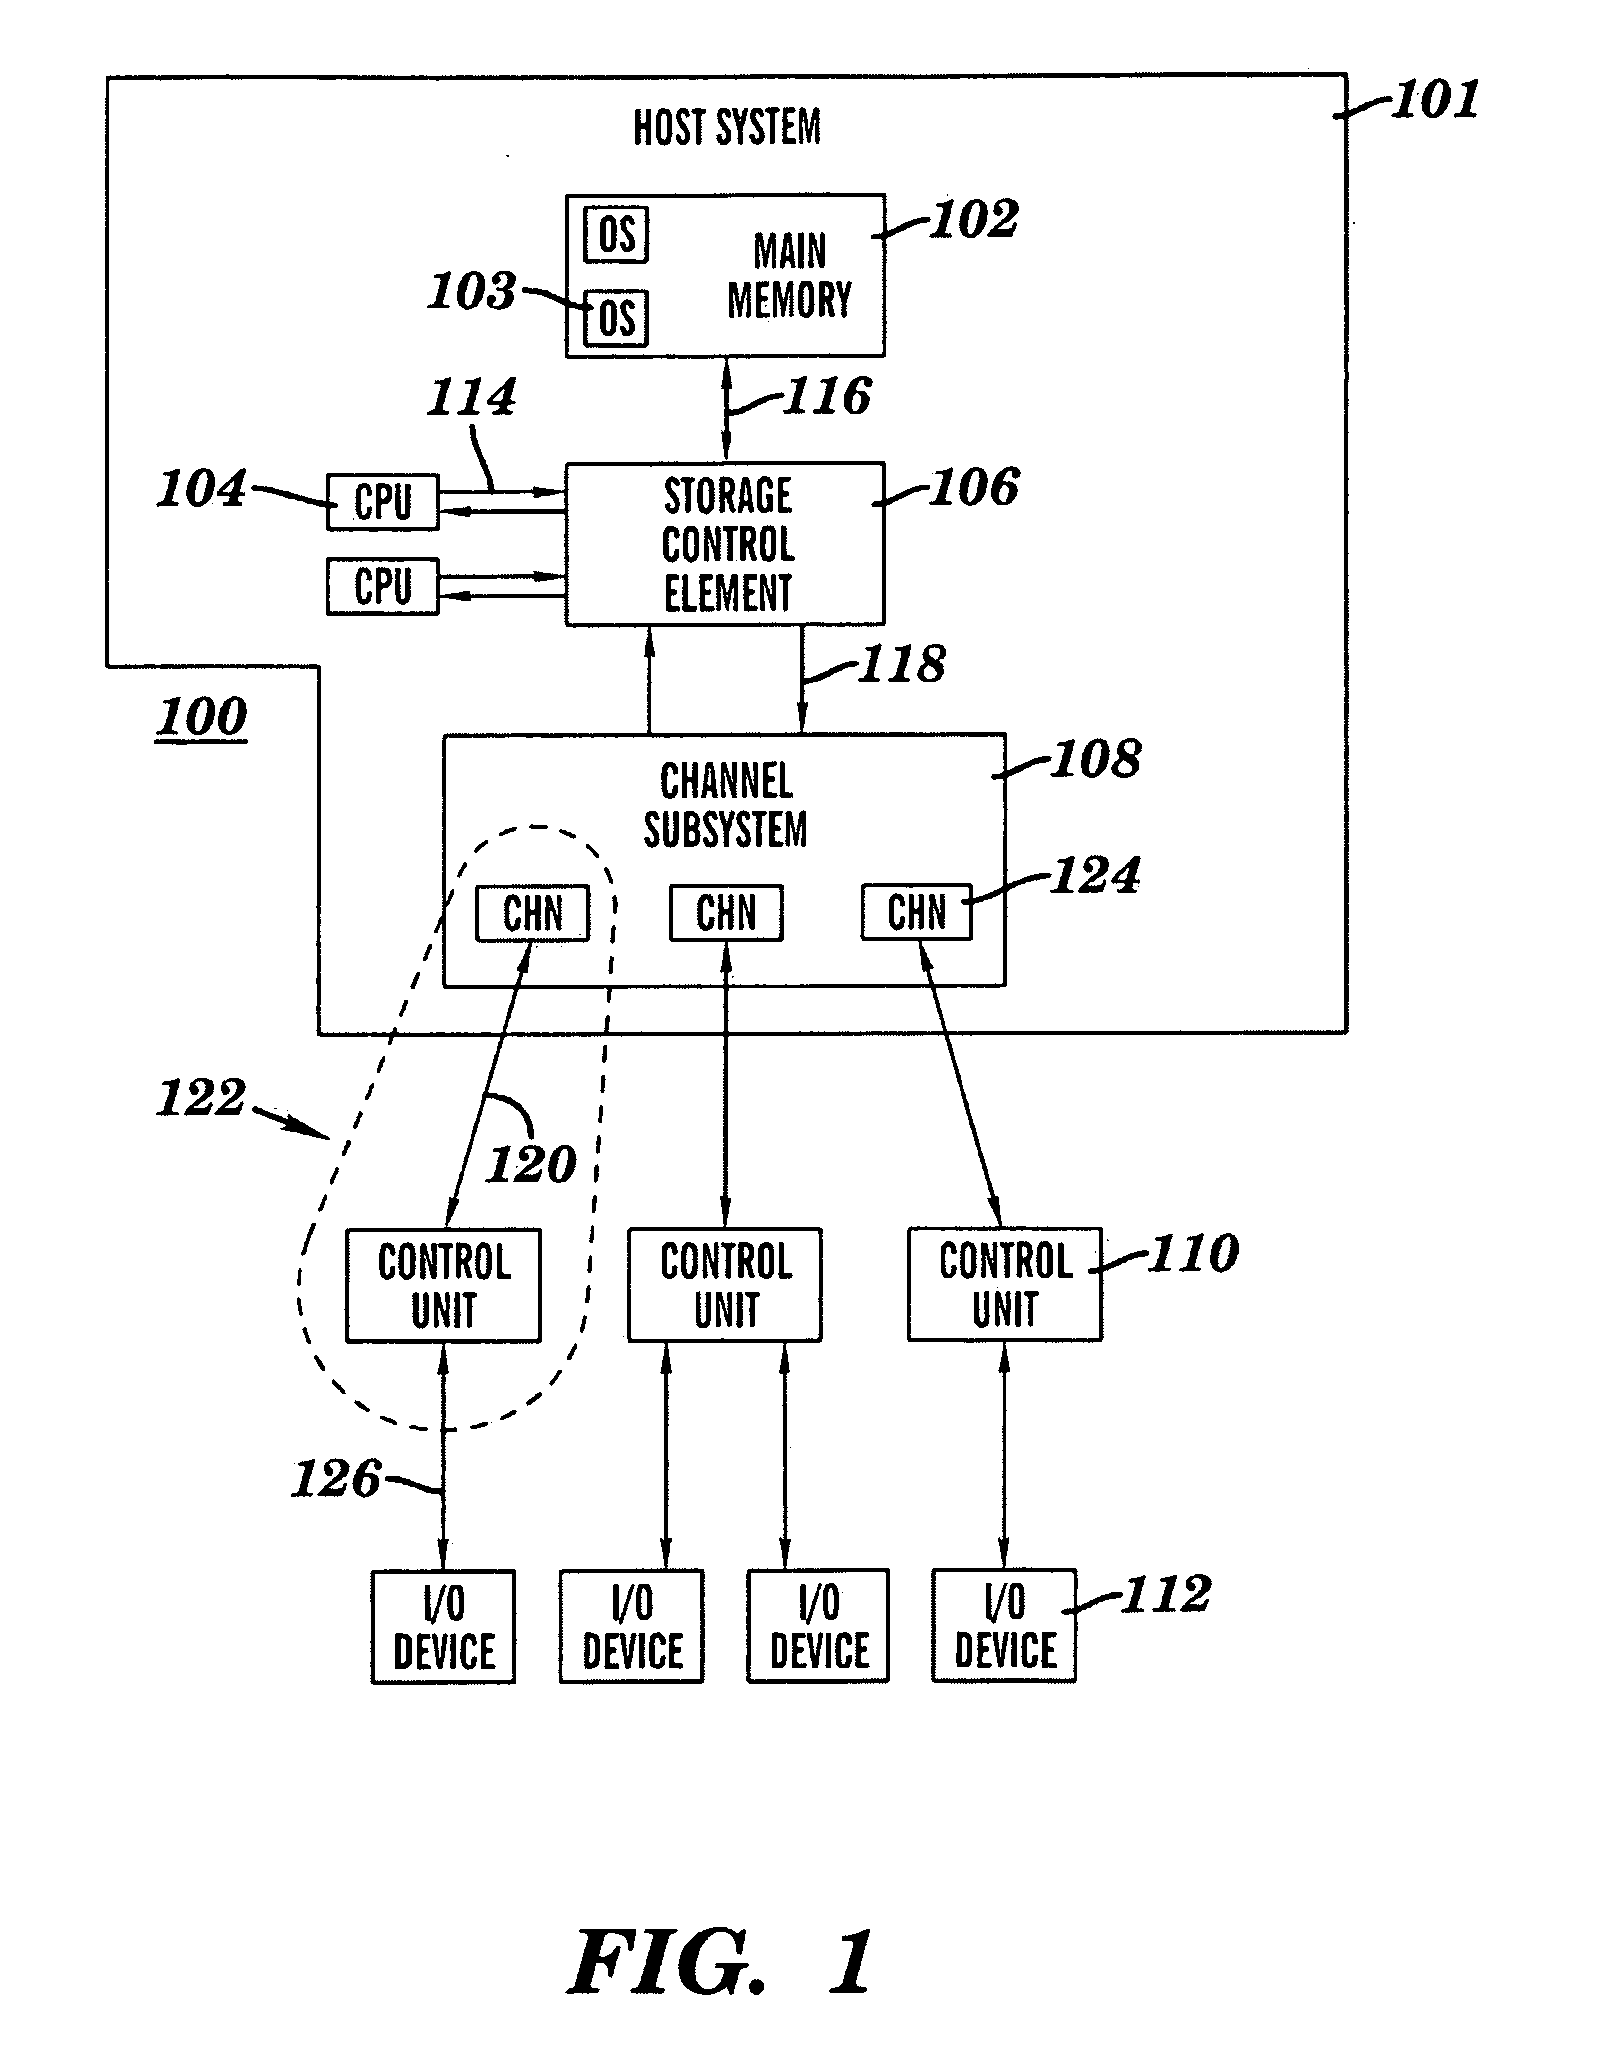 Computer command and response for determining the state of an I/O operation